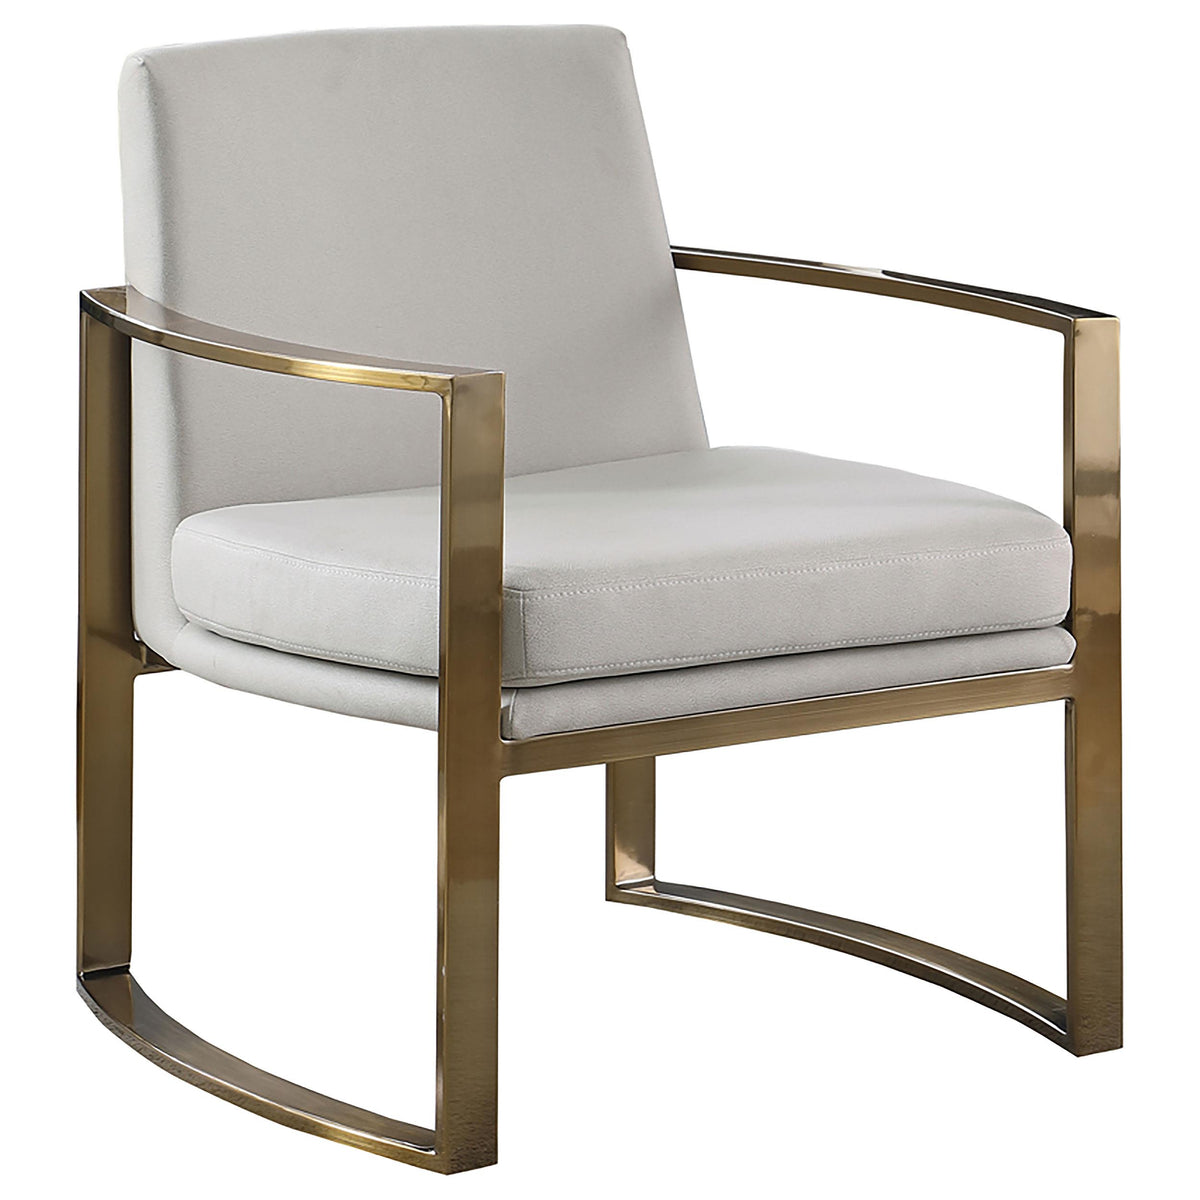 Cory Concave Metal Arm Accent Chair Cream and Bronze  Half Price Furniture